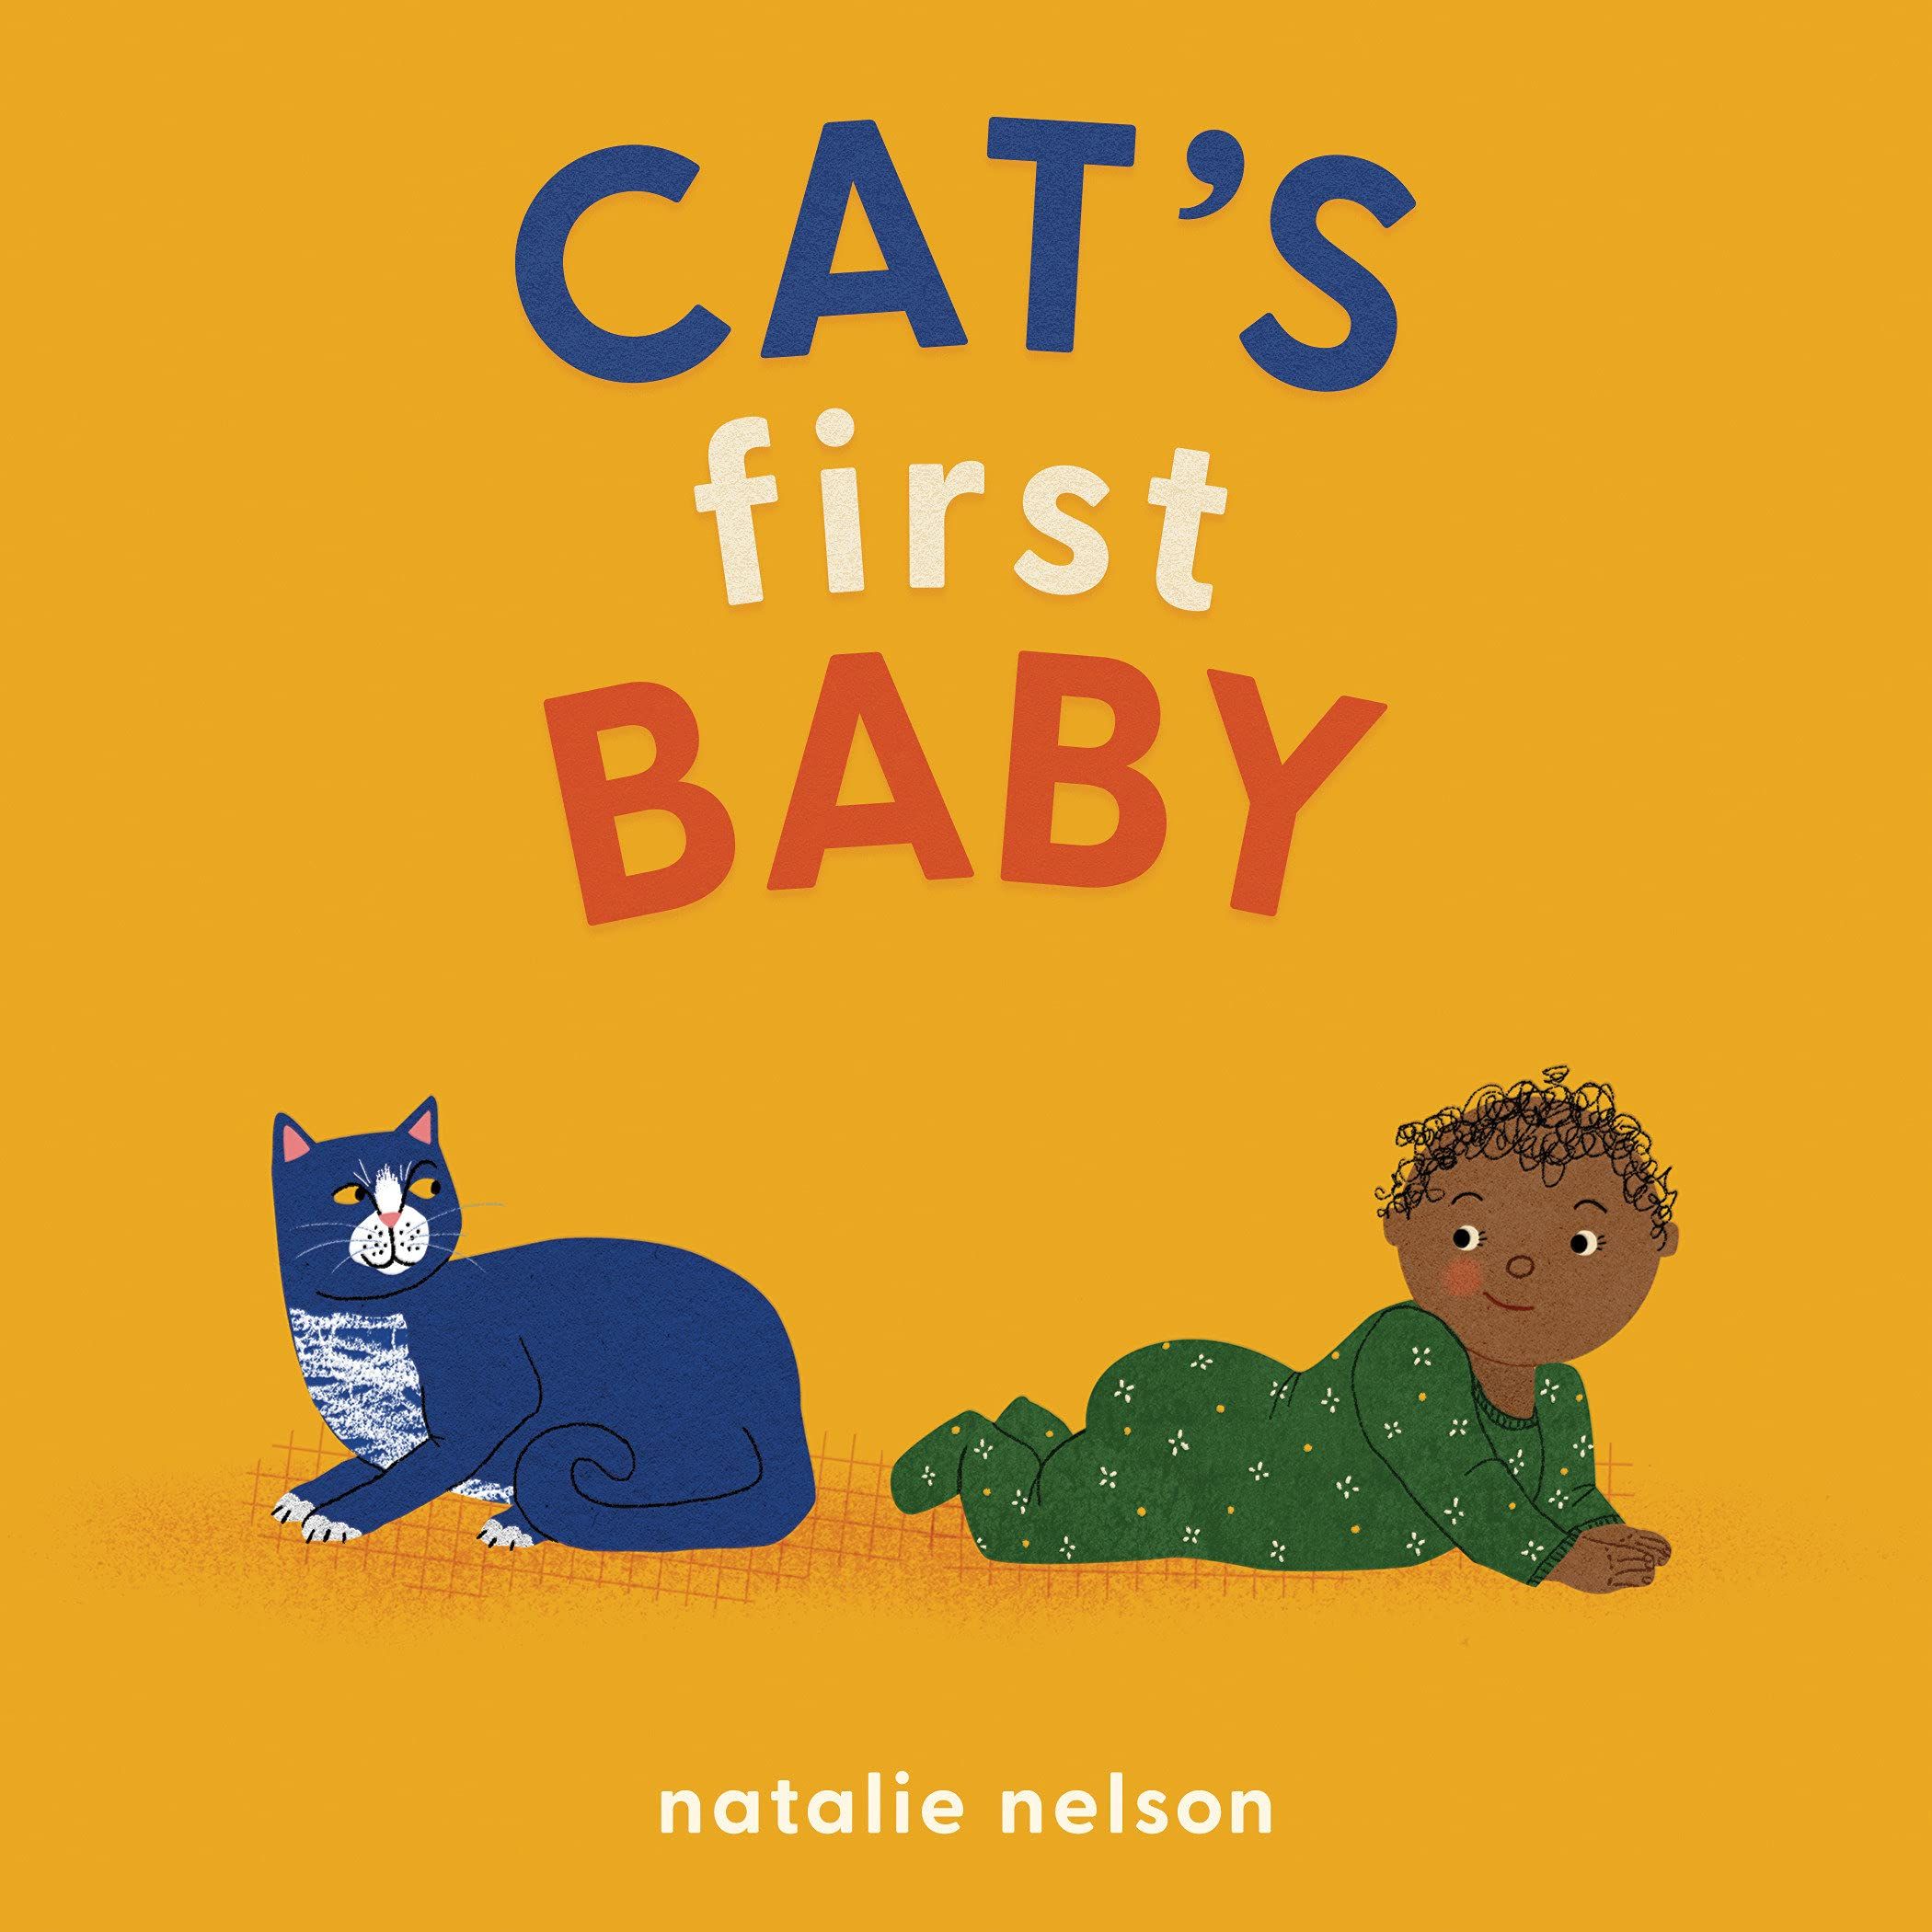 <p><strong>$9.29</strong></p><p>This purr-fectly adorable book is great for the feline fans among us. Kids who live with cats will love that this story is told from the kitty's perspective. </p>